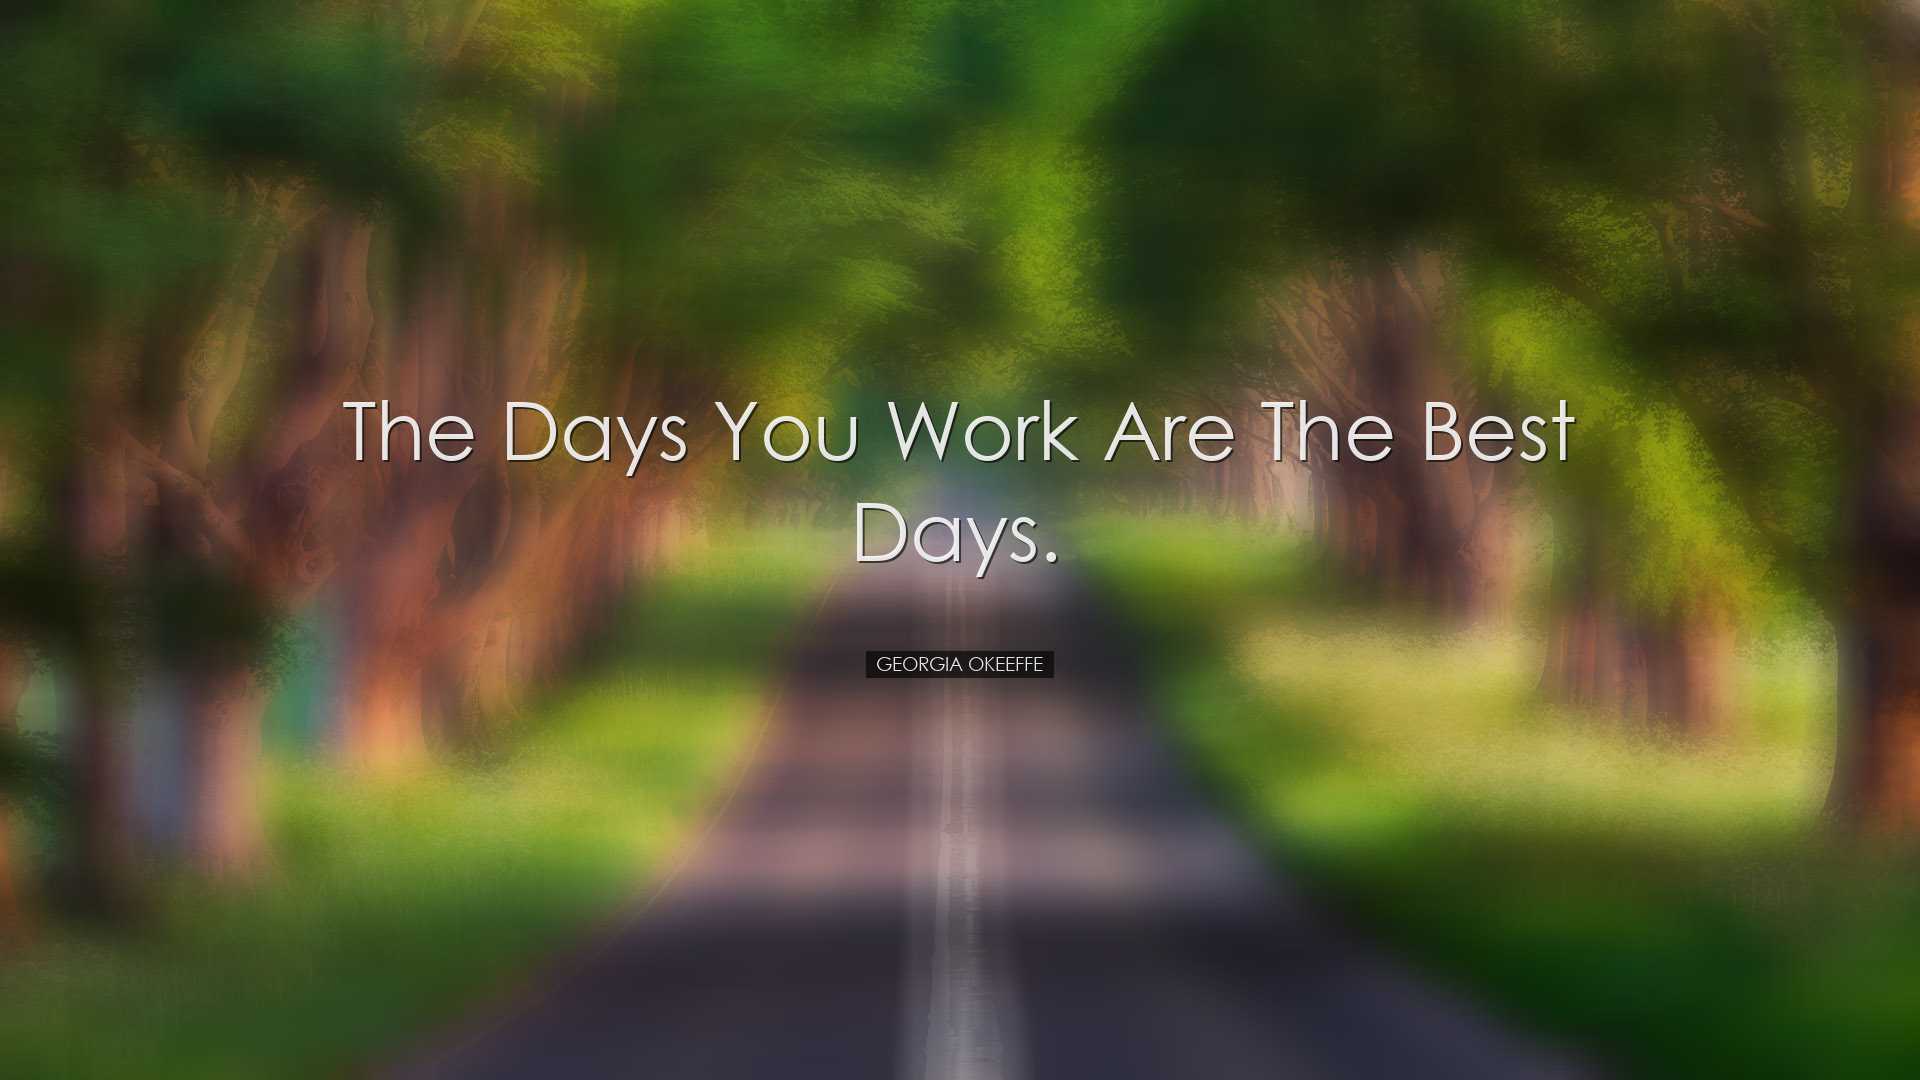 The days you work are the best days. - Georgia OKeeffe